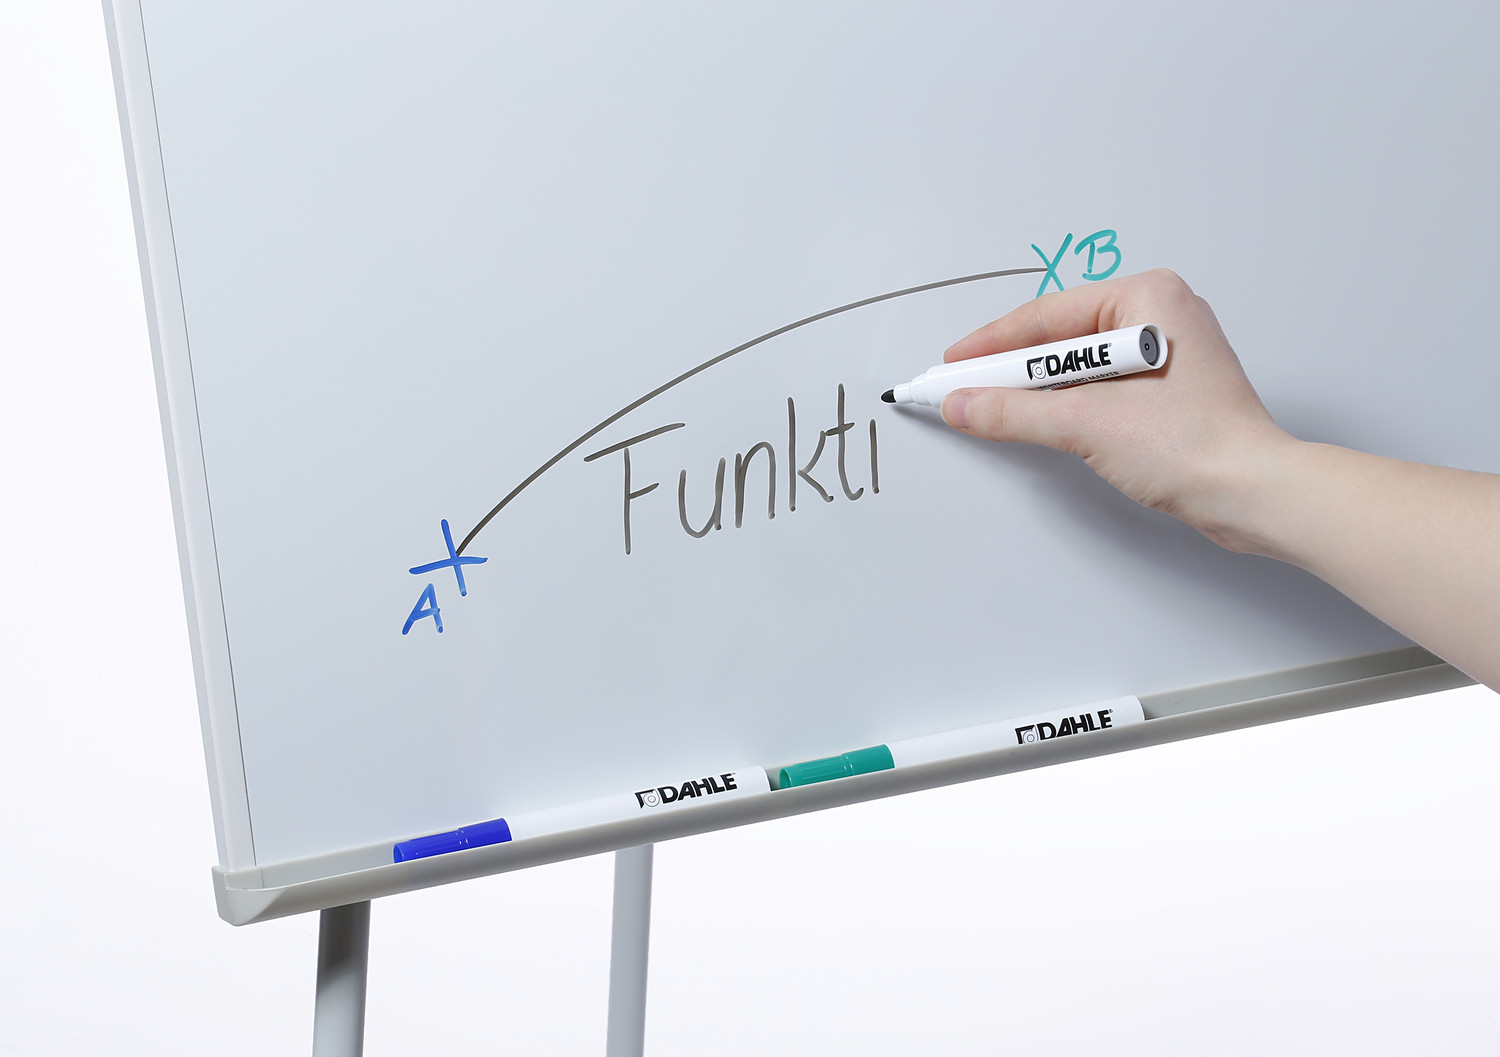 Also suitable for use without flip chart pad: write straight onto the white magnetic surface with dry-erasable whiteboard markers